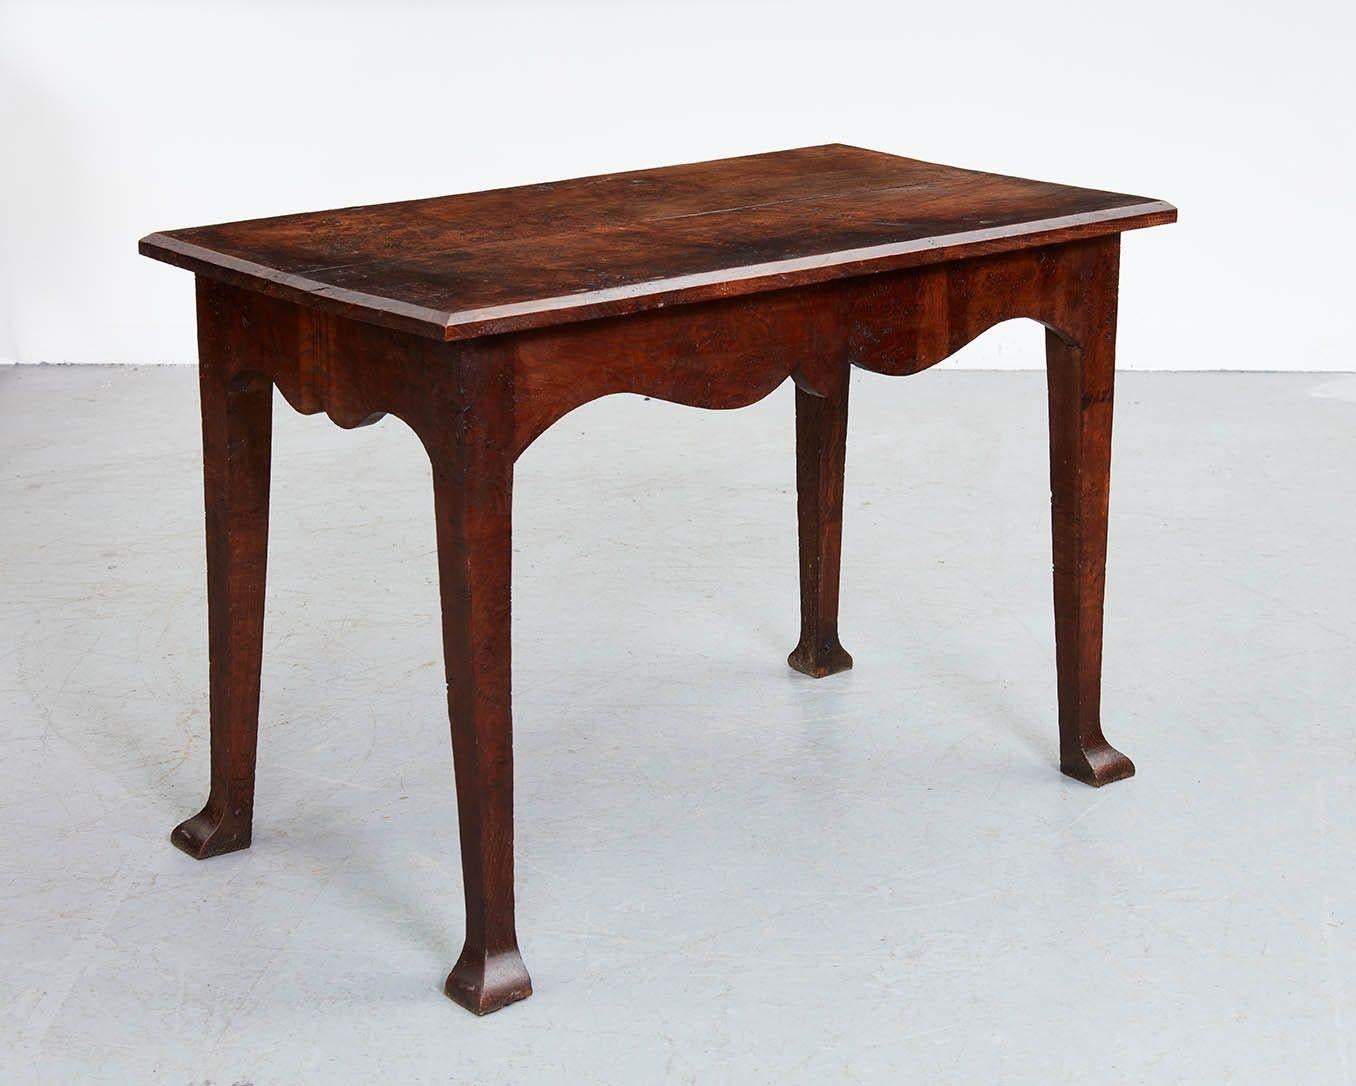 An 18th century English center table in oak having a rectangular two plank burr oak top with chamfered edges, over scalloped shaped apron all around, on tapered square section legs ending in stylized spade feet. Wonderful figuring and color, and a